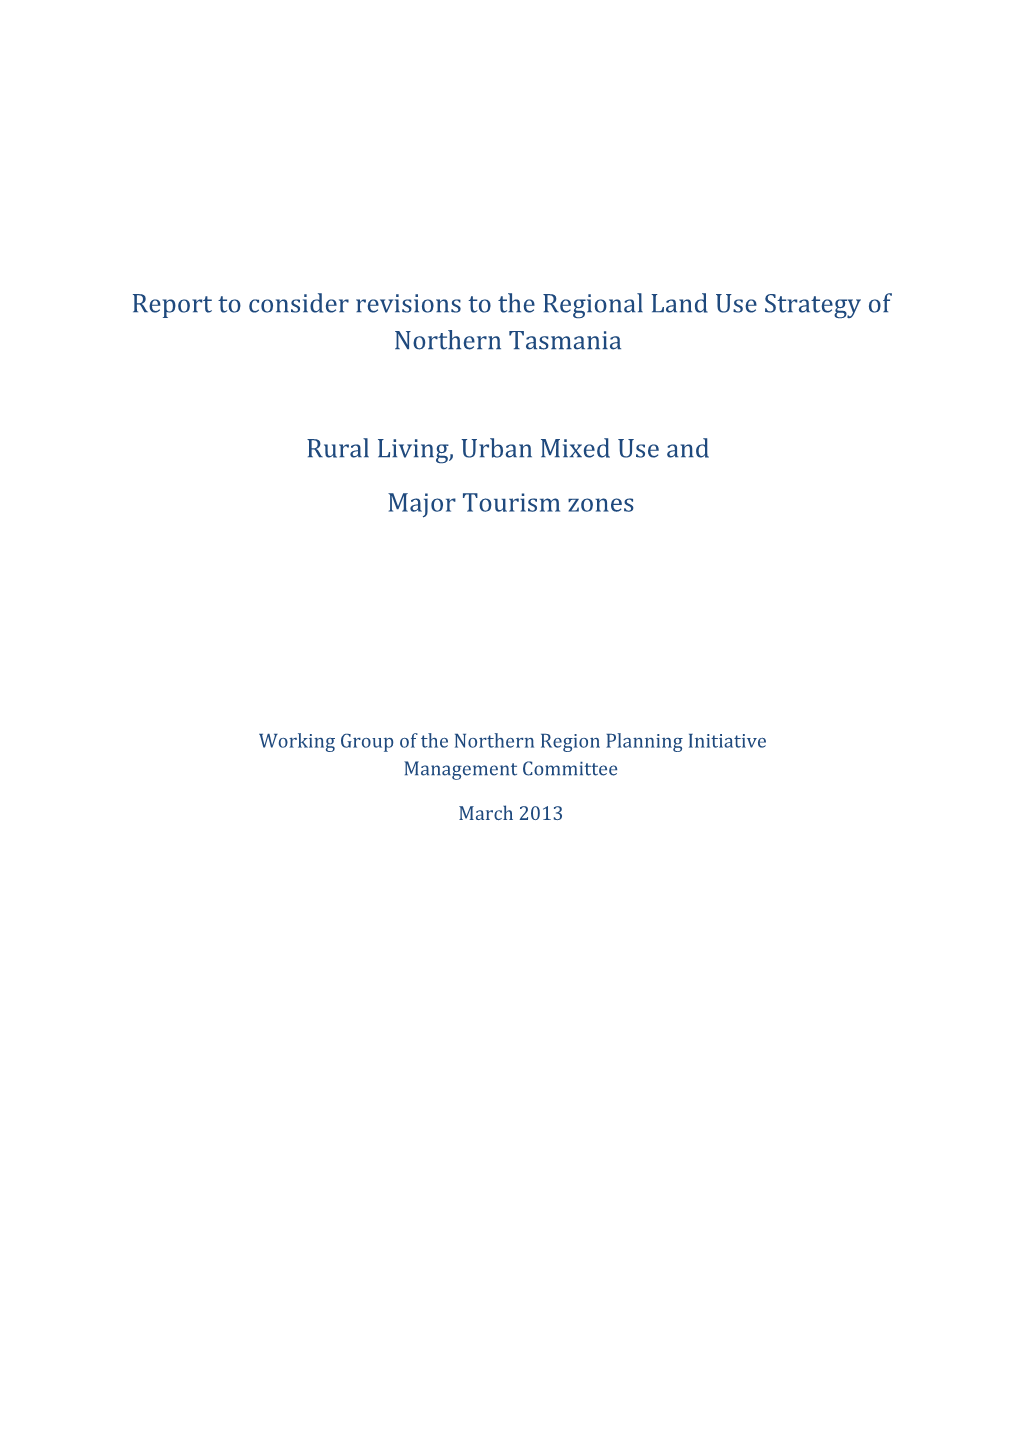 Report to Consider Revisions to the Regional Land Use Strategy of Northern Tasmania